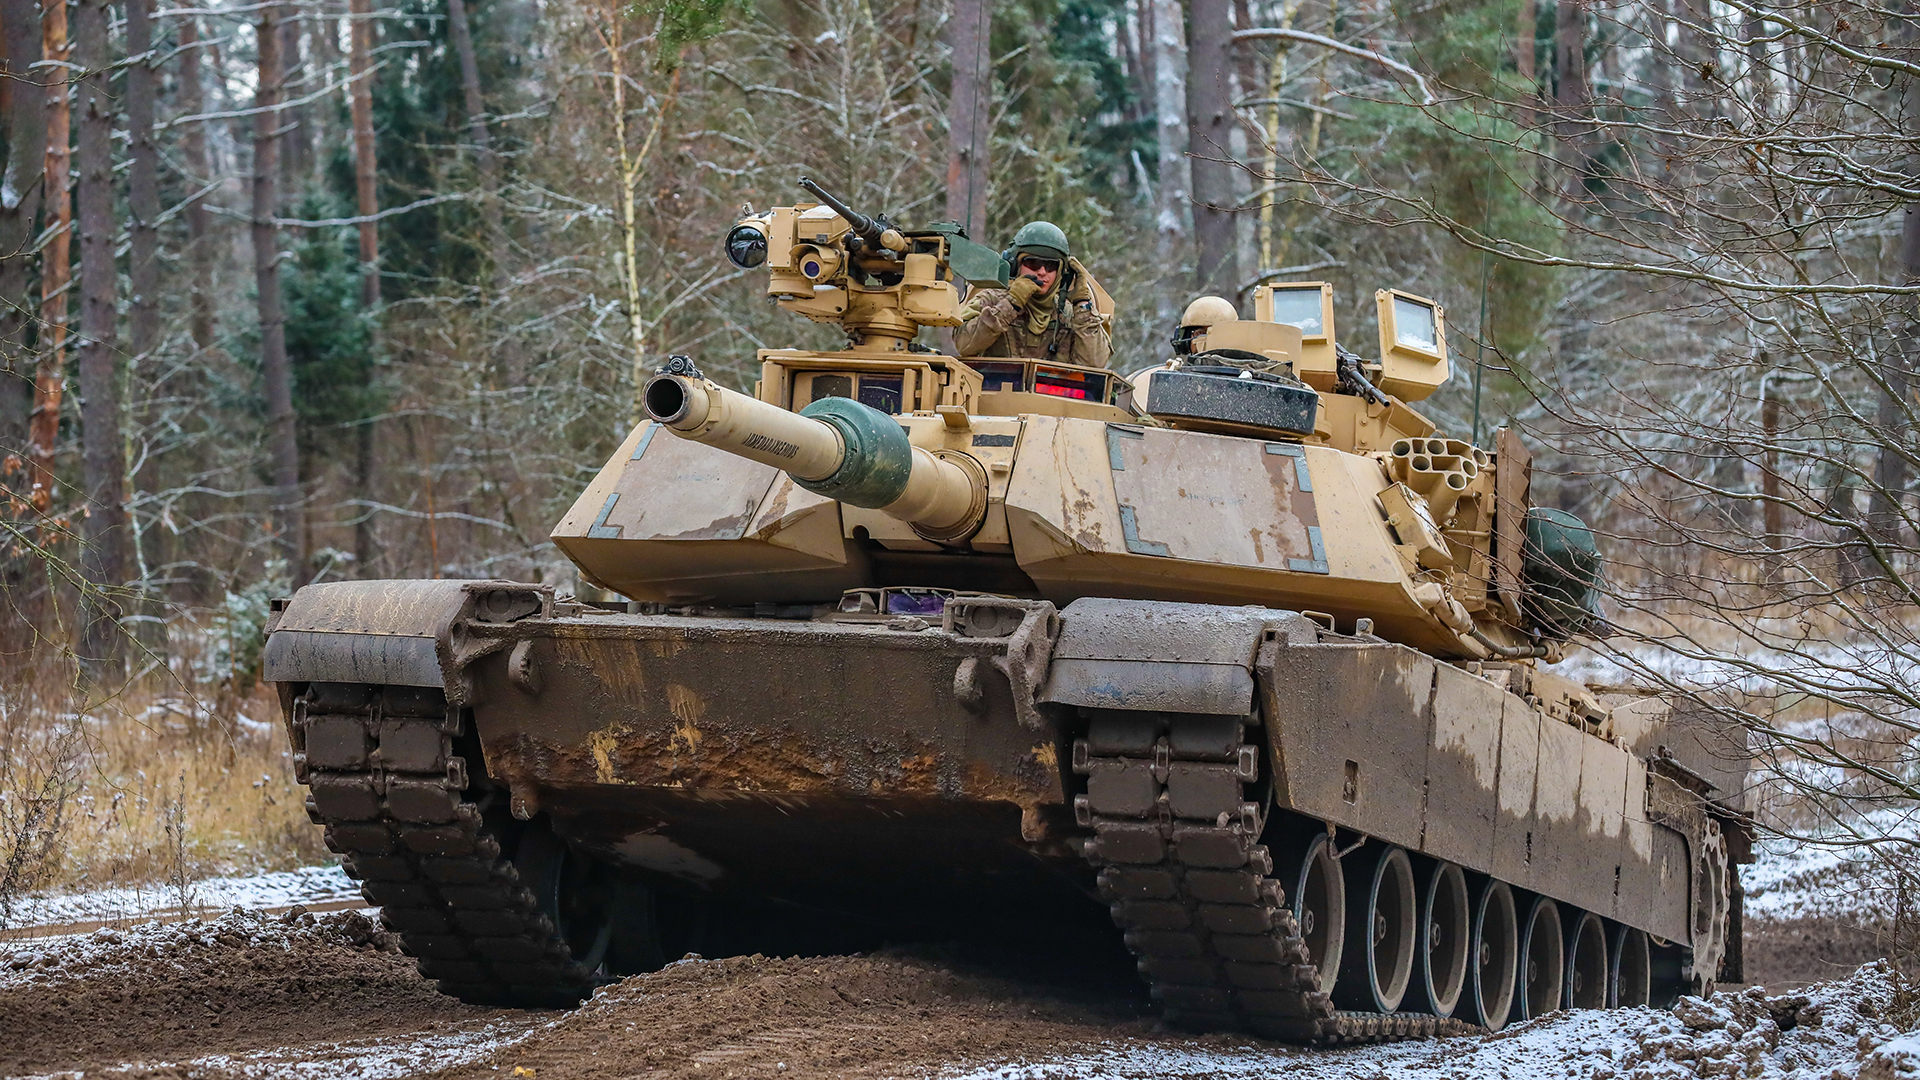 US soldiers operate an Abrams M1-A1 tank to engage a simulated opposing force during the Bull Run training exercise at Bemowo Piskie, Poland, in November 2022.